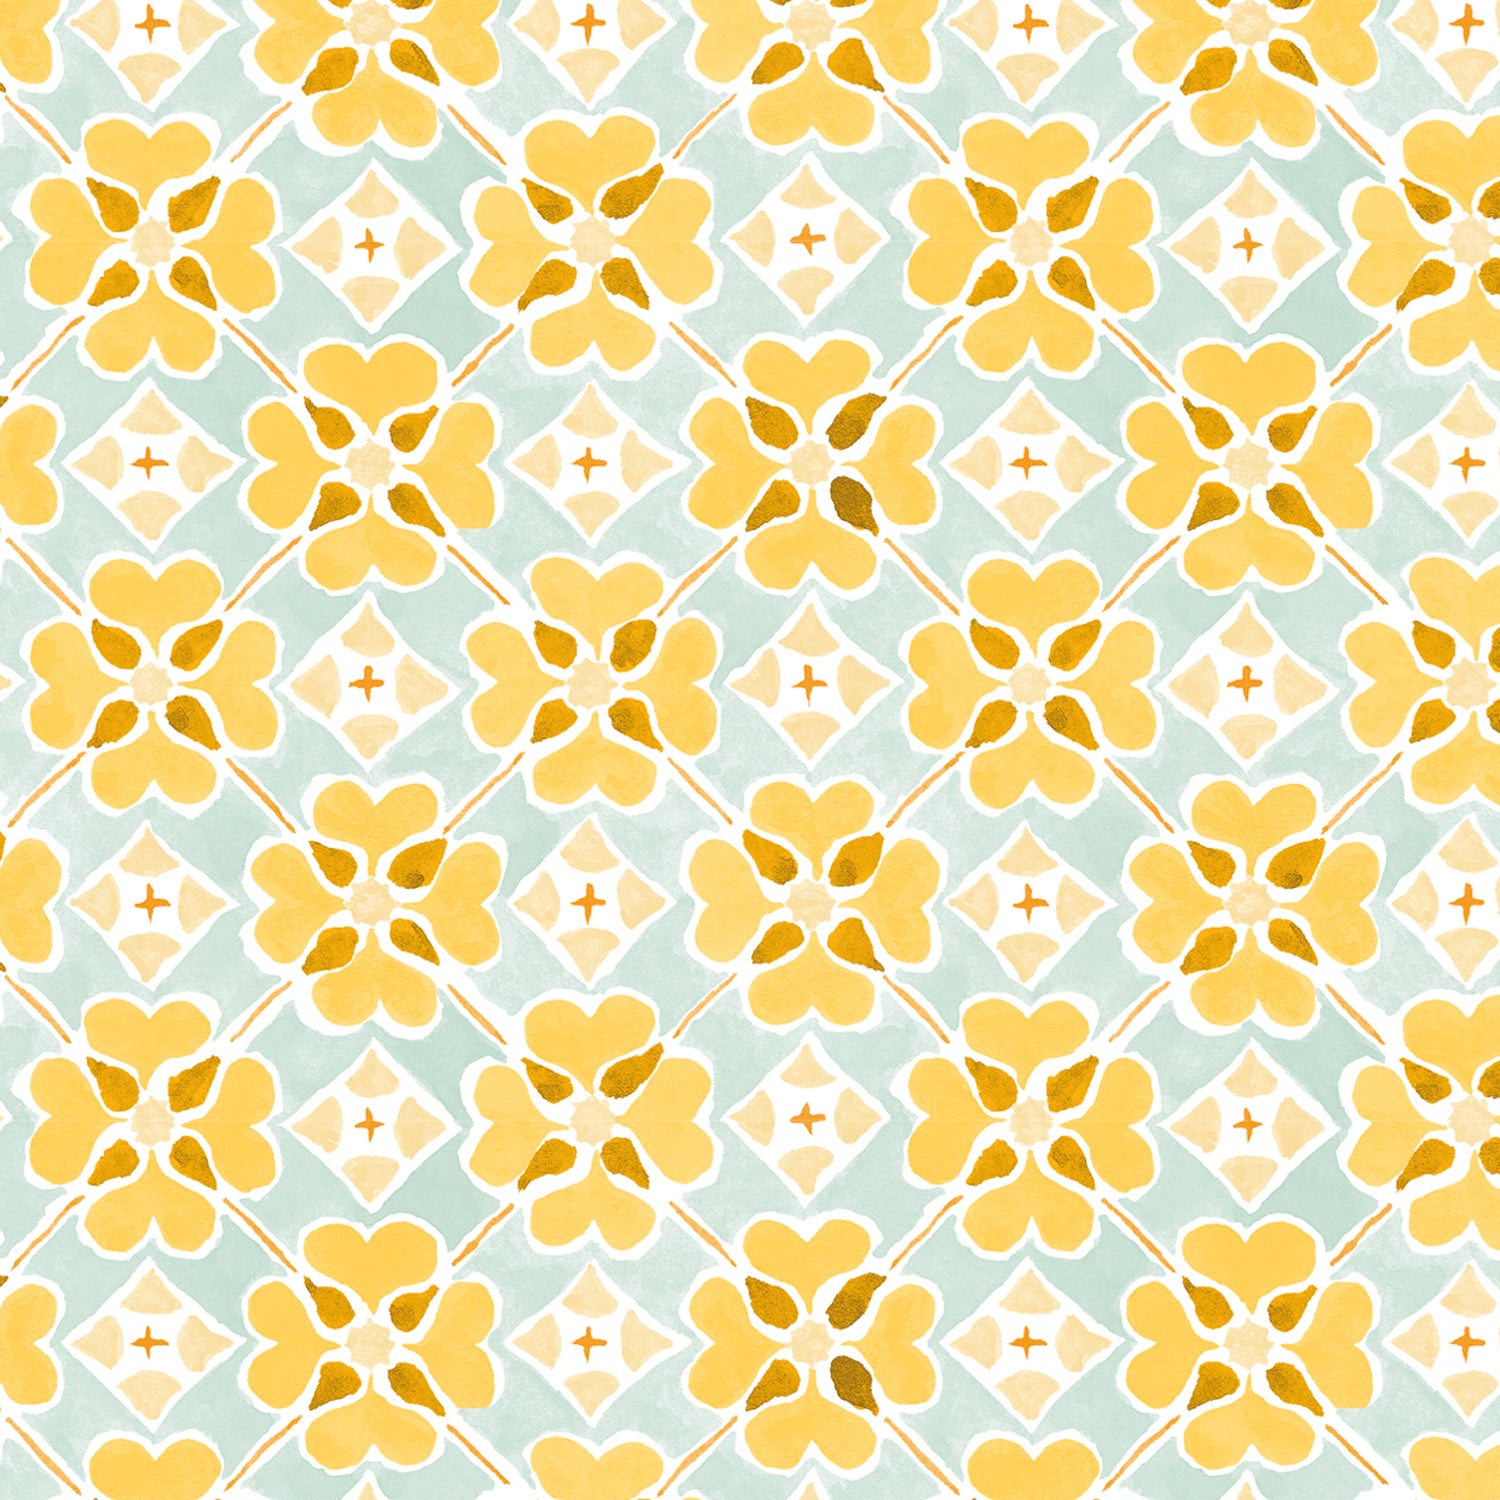 Detail of wallpaper in a floral lattice print in light blue, yellow, brown and white.